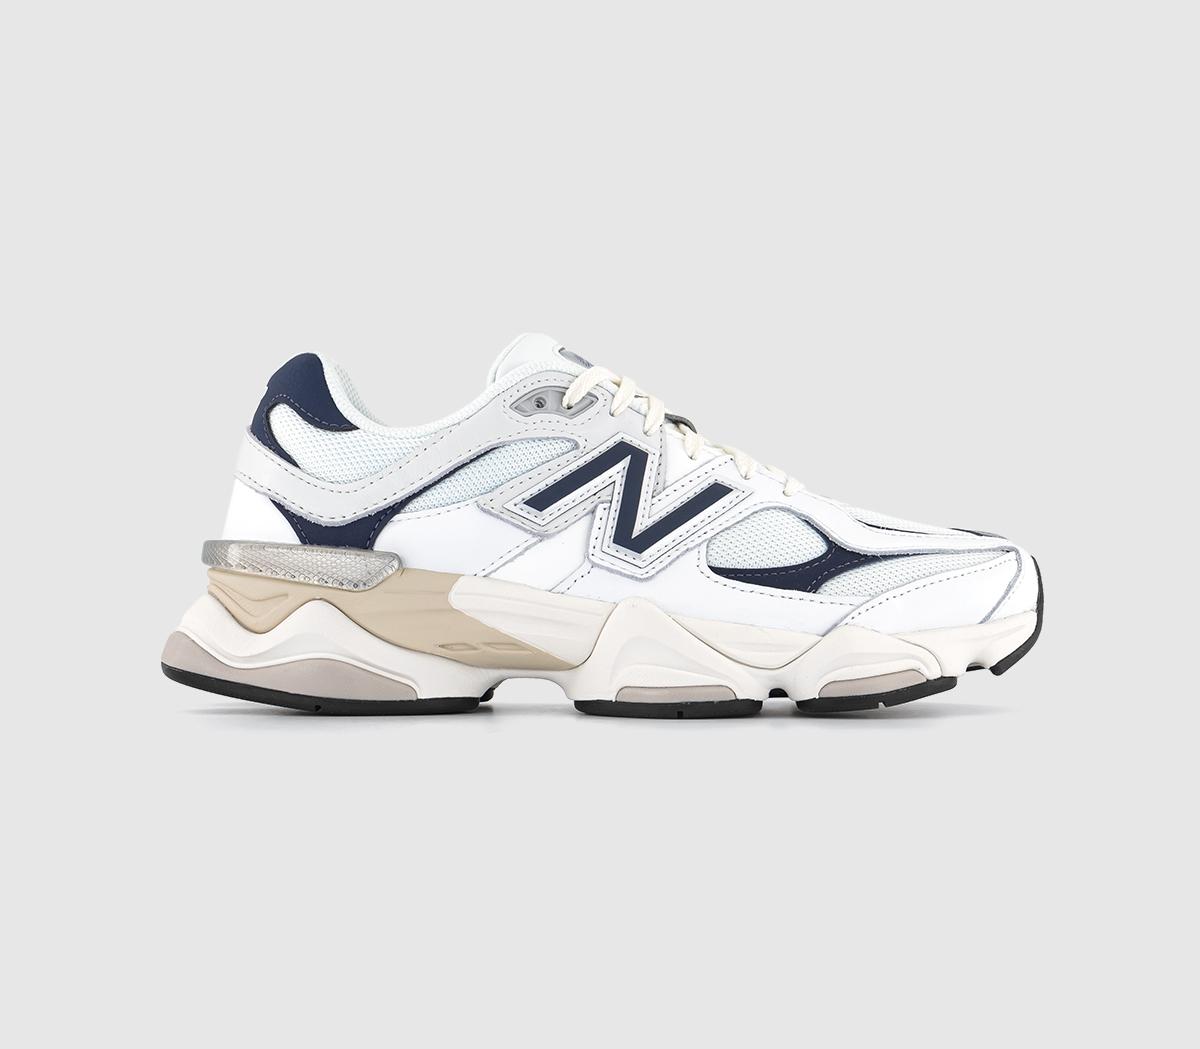 New Balance9060 Trainers White Off White Blue